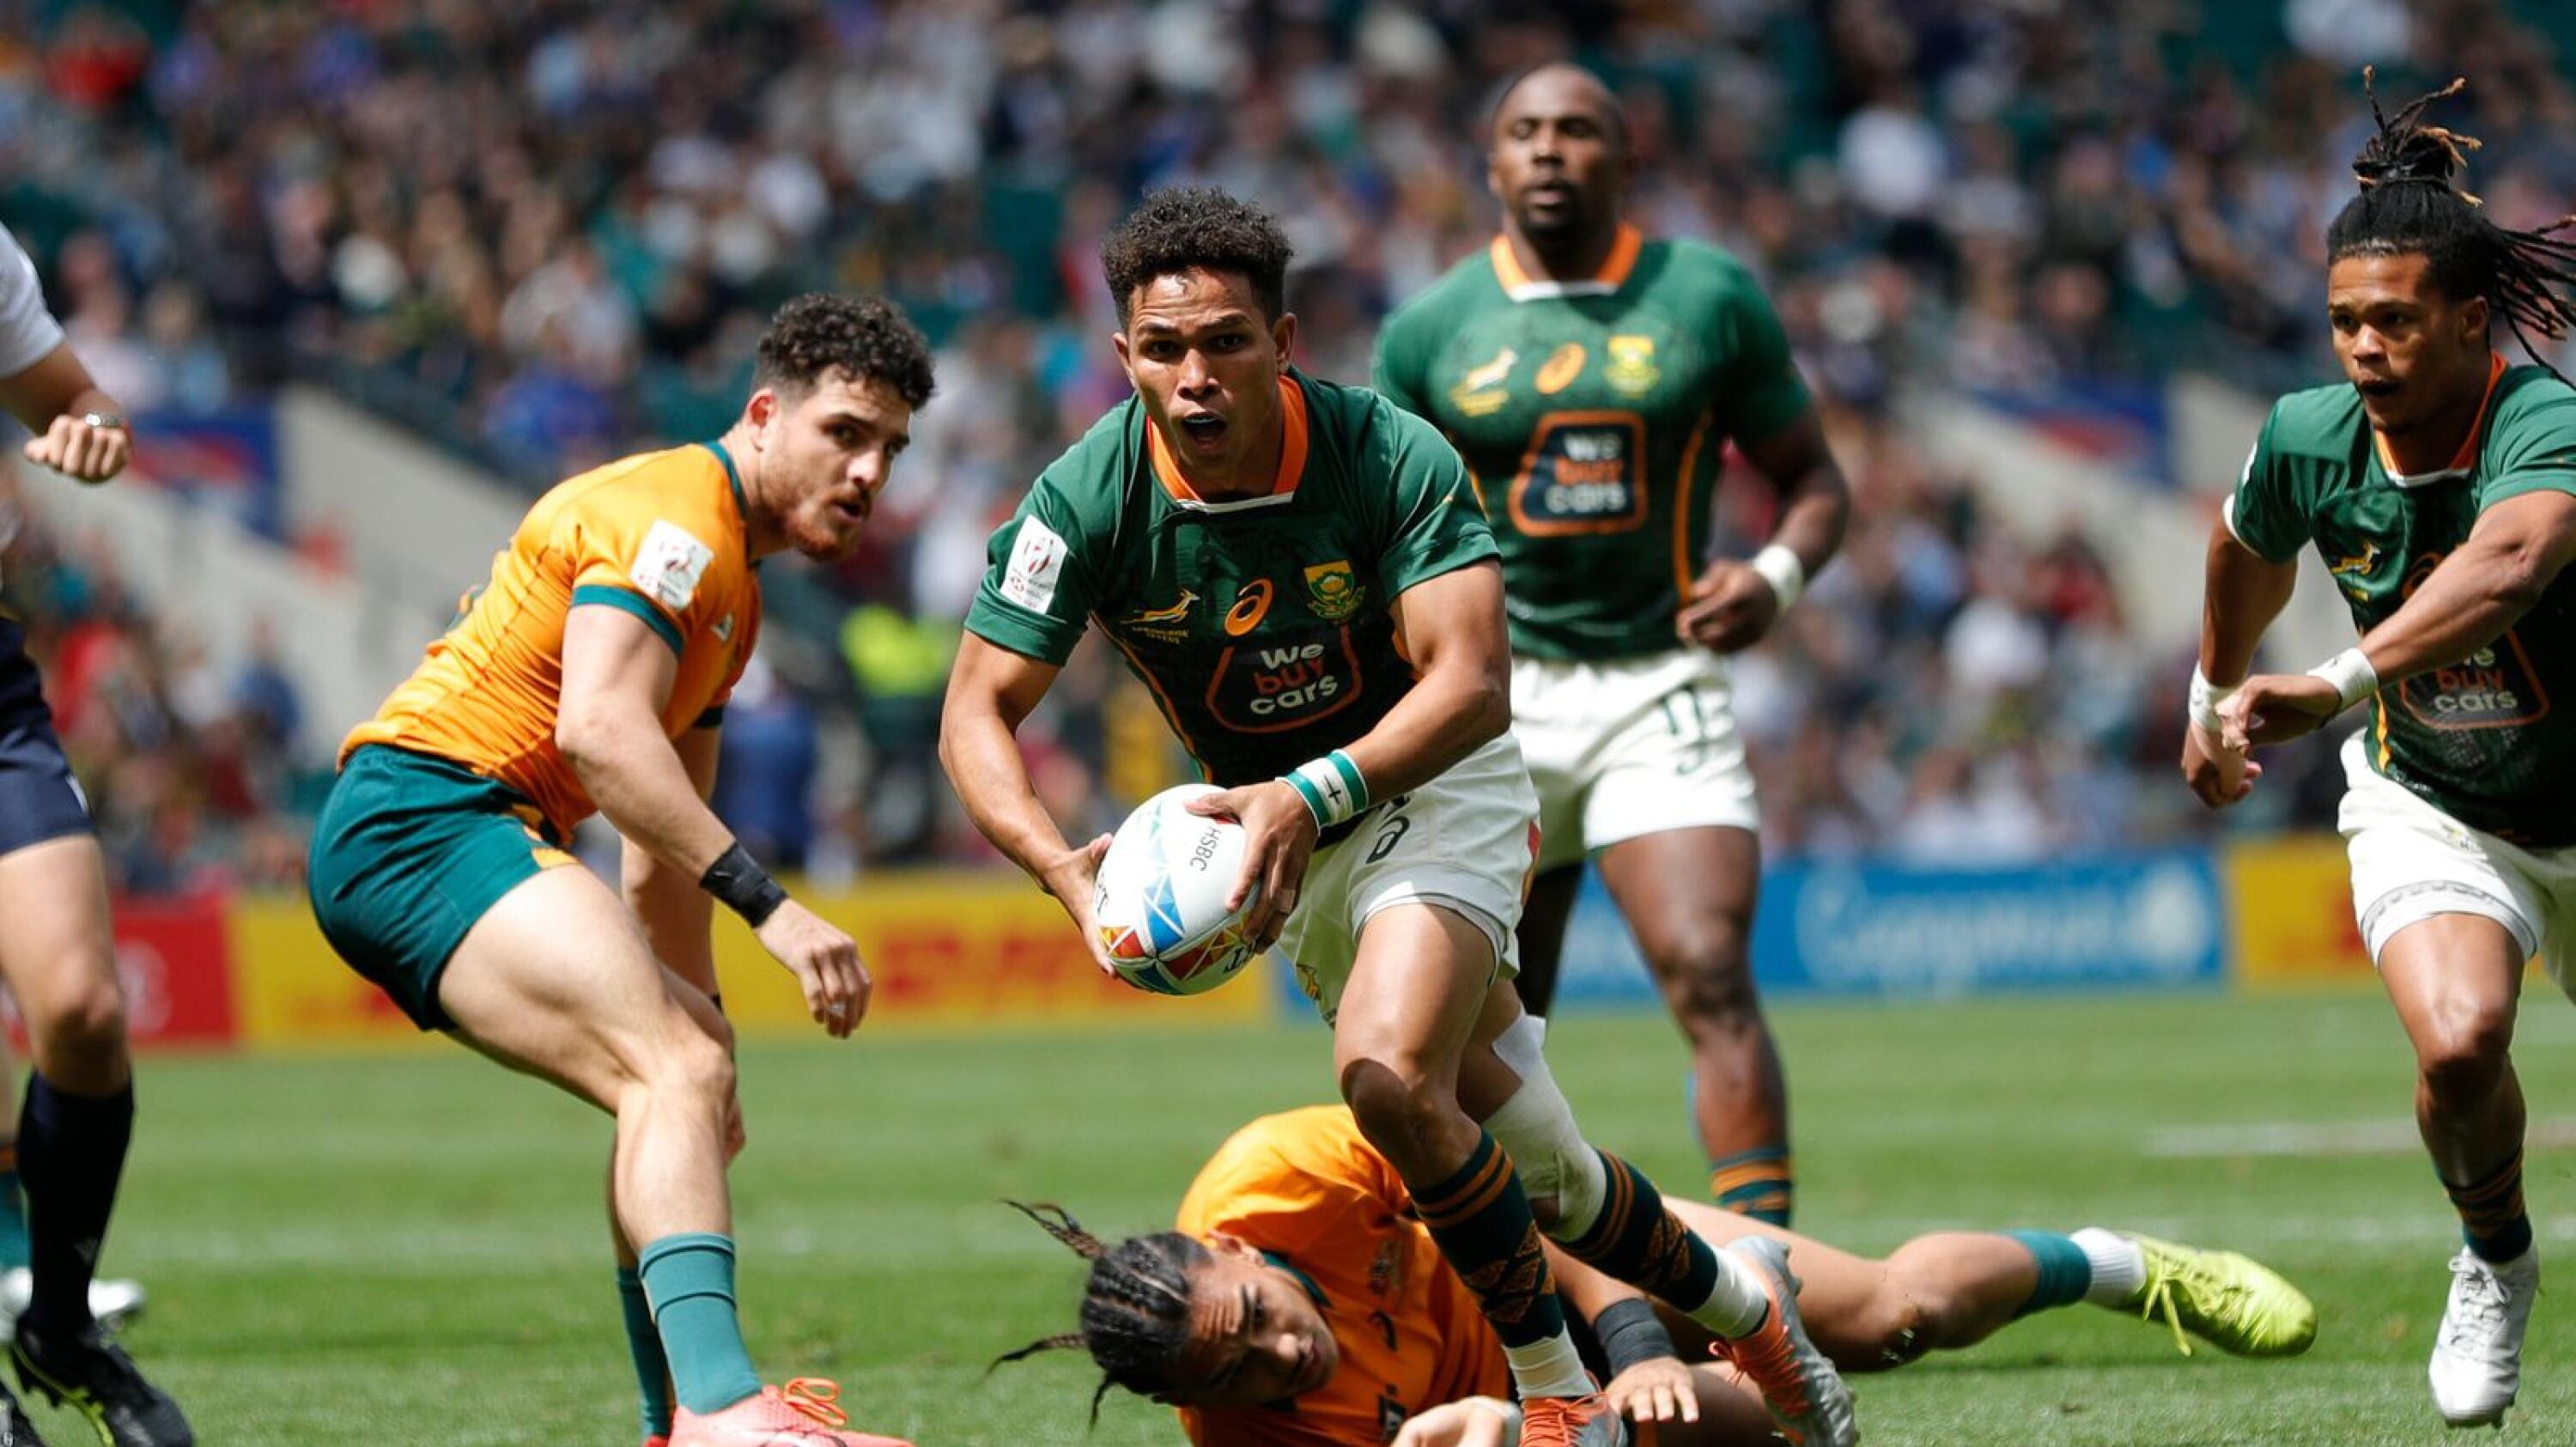 The Blitzboks in action at the London Sevens